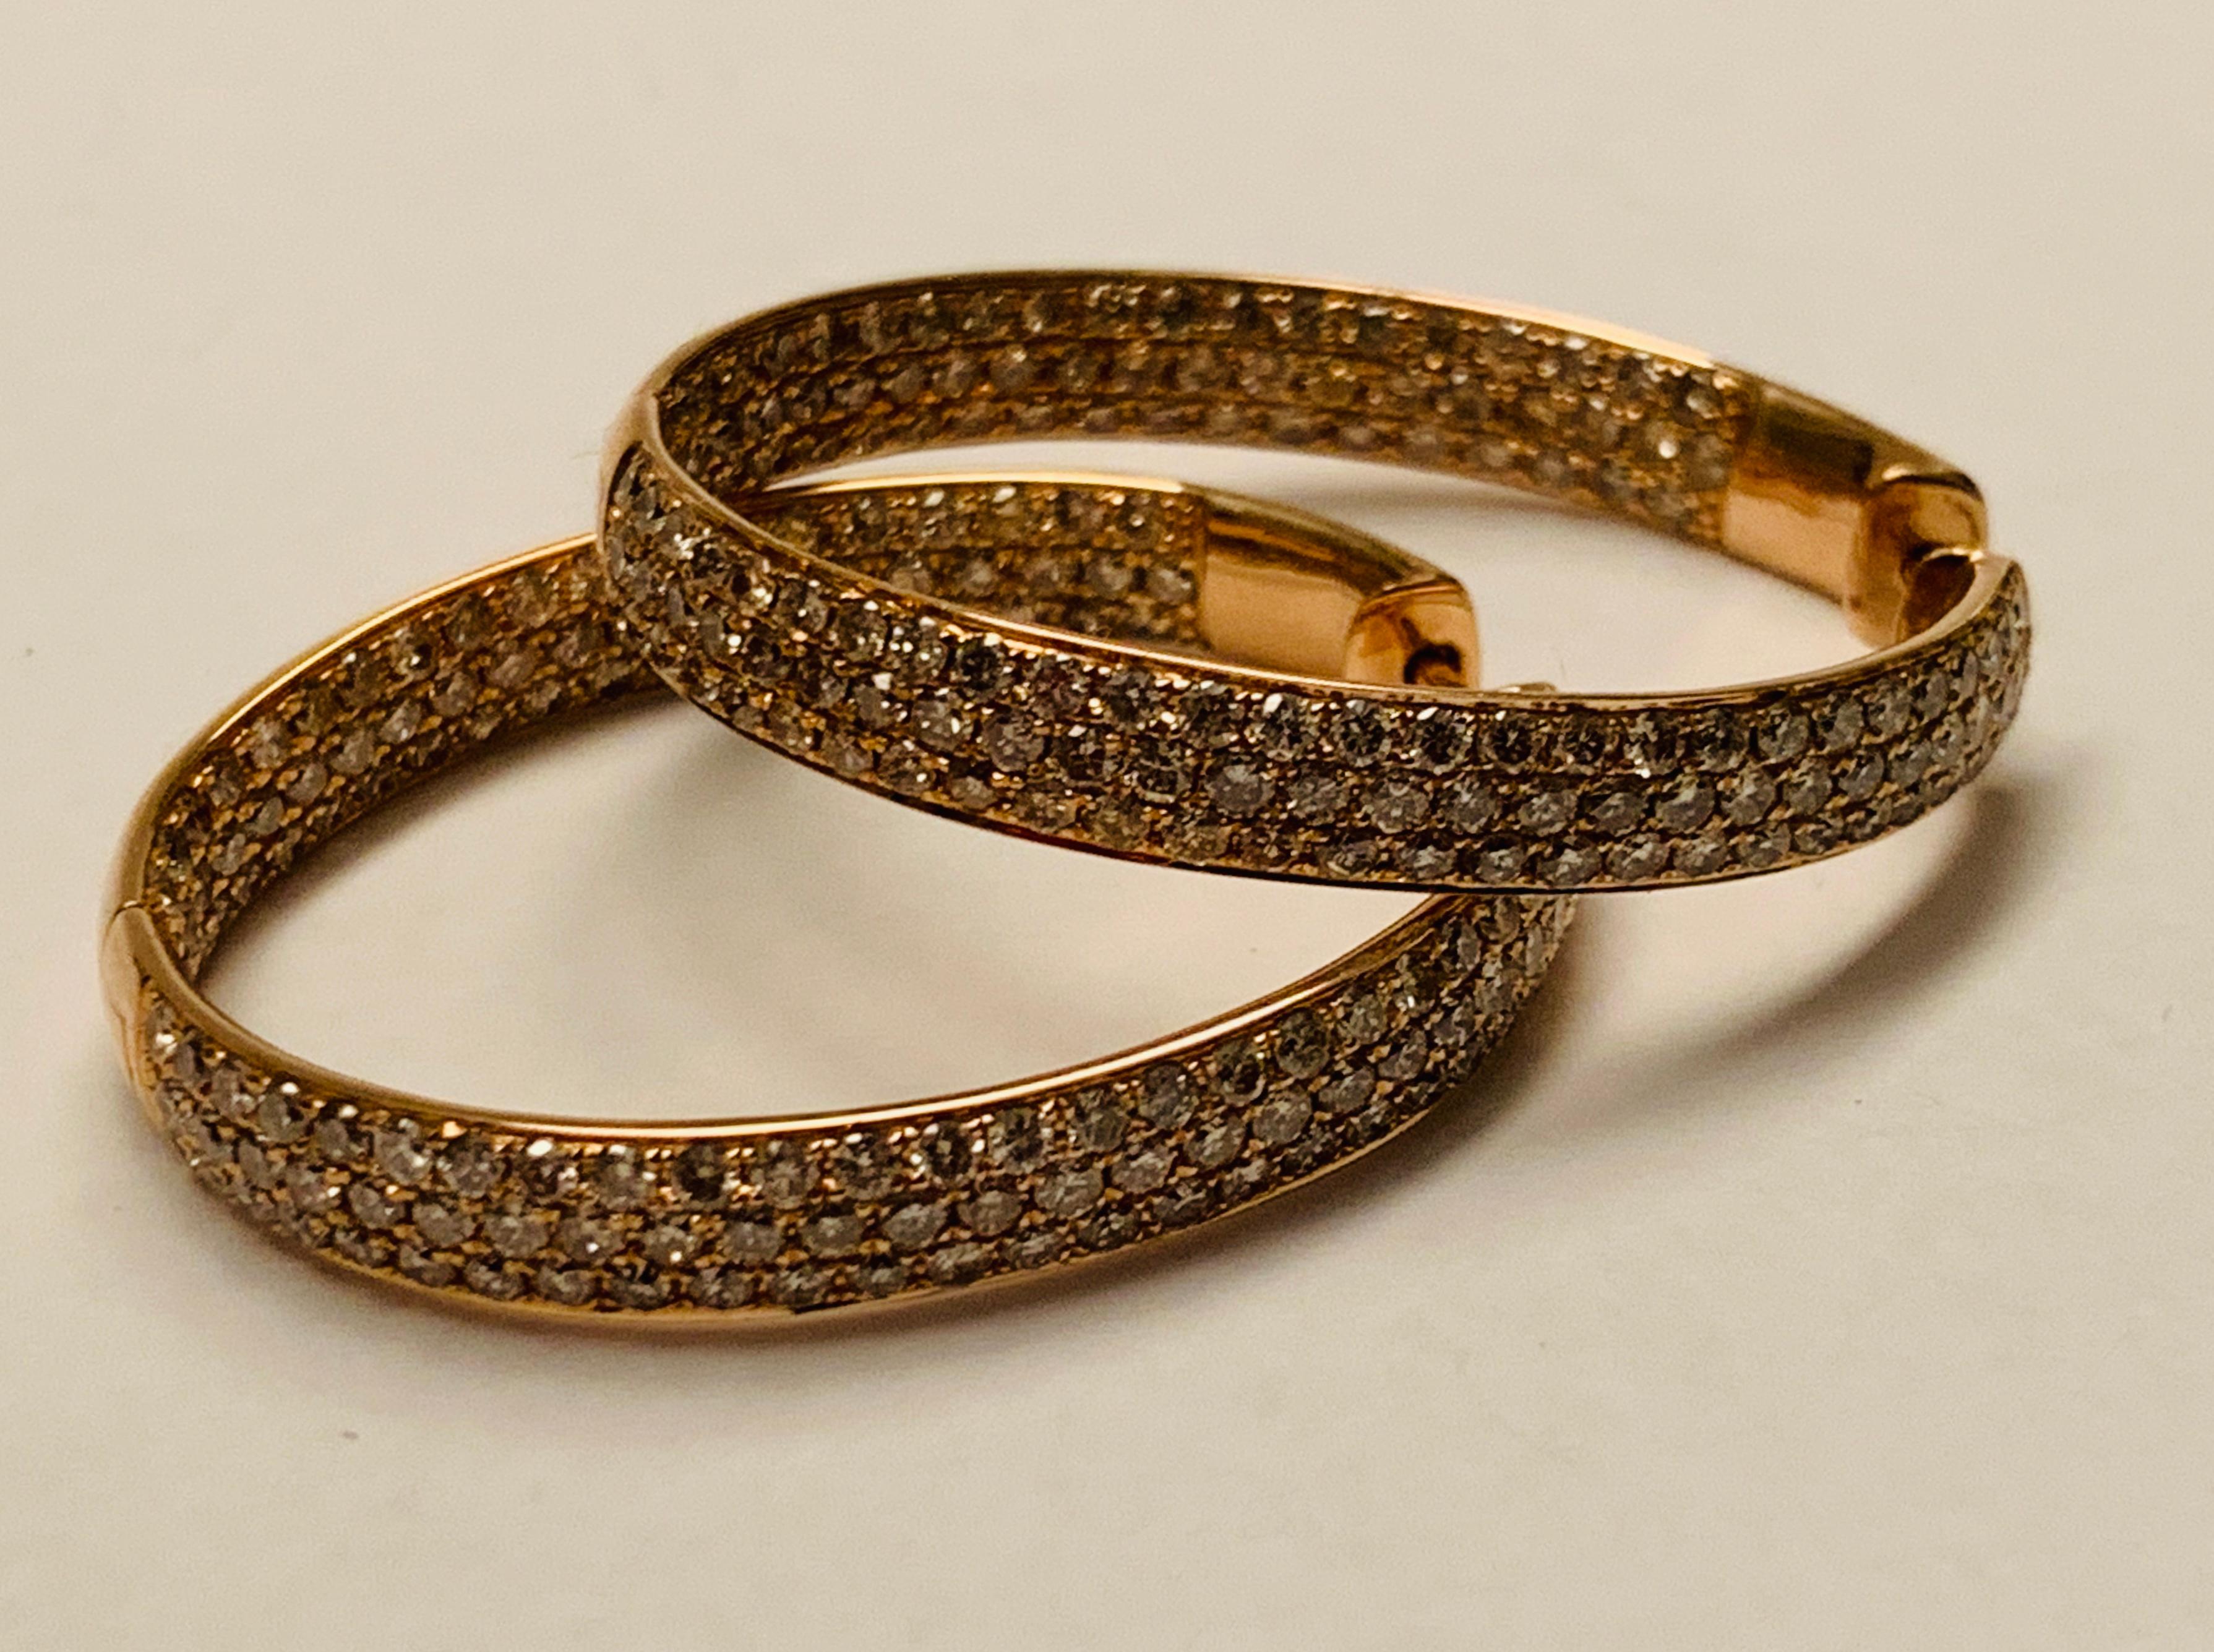 Women's 18 Karat Rose Gold Hinged Hoop Style Earrings Pave Set with Champagne Diamonds